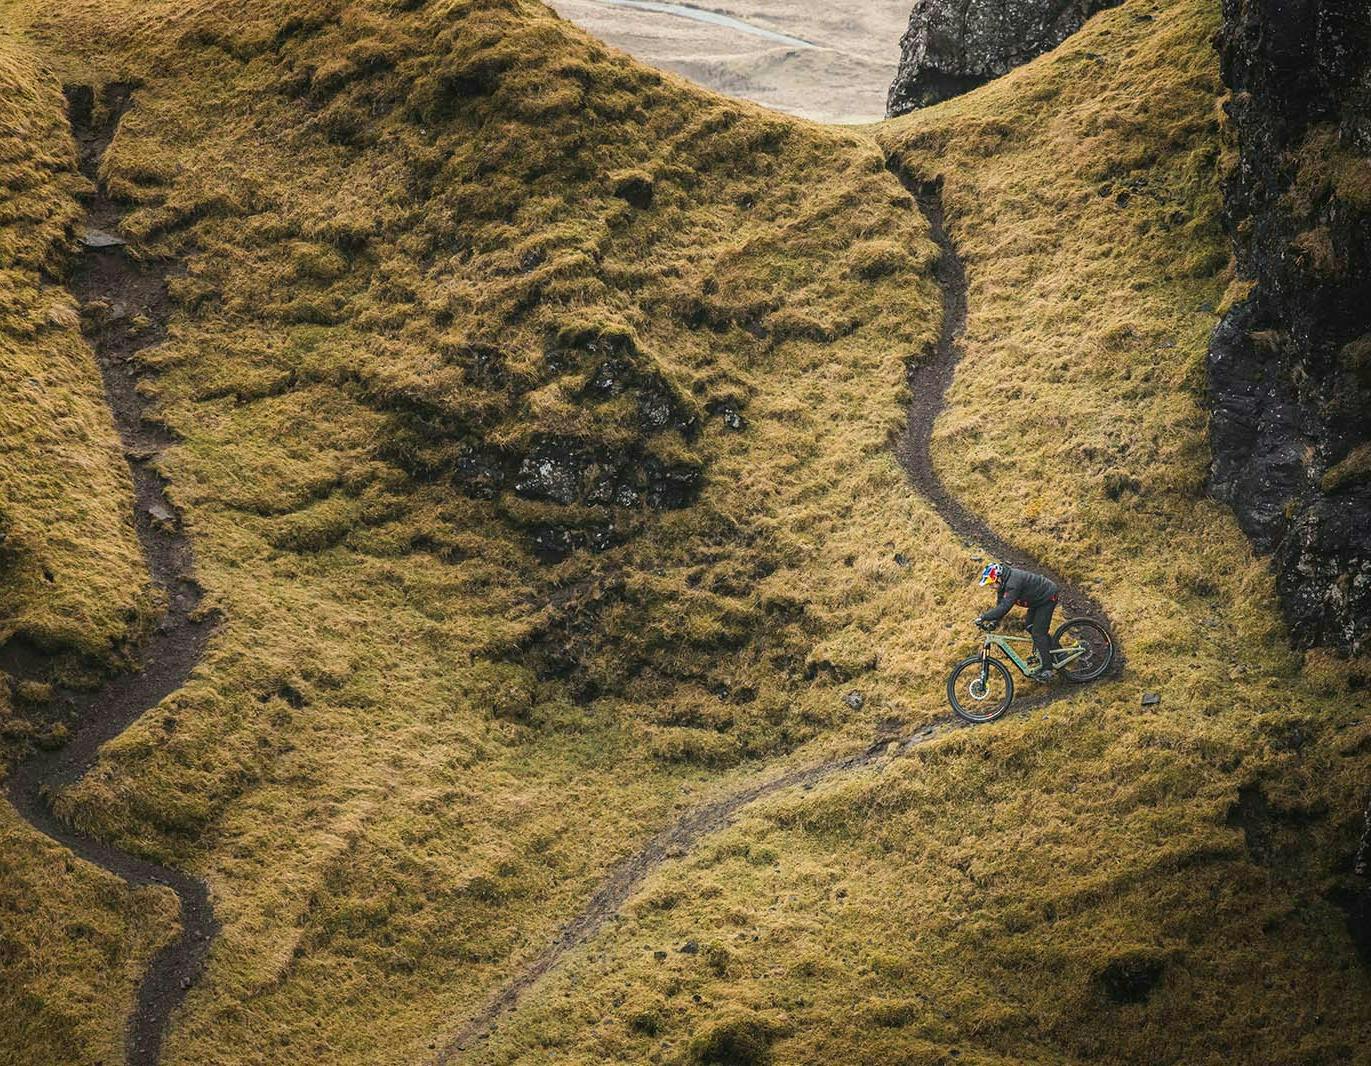 Danny MacAskill riding his Heckler eMTB downhill on a steep rocky trail